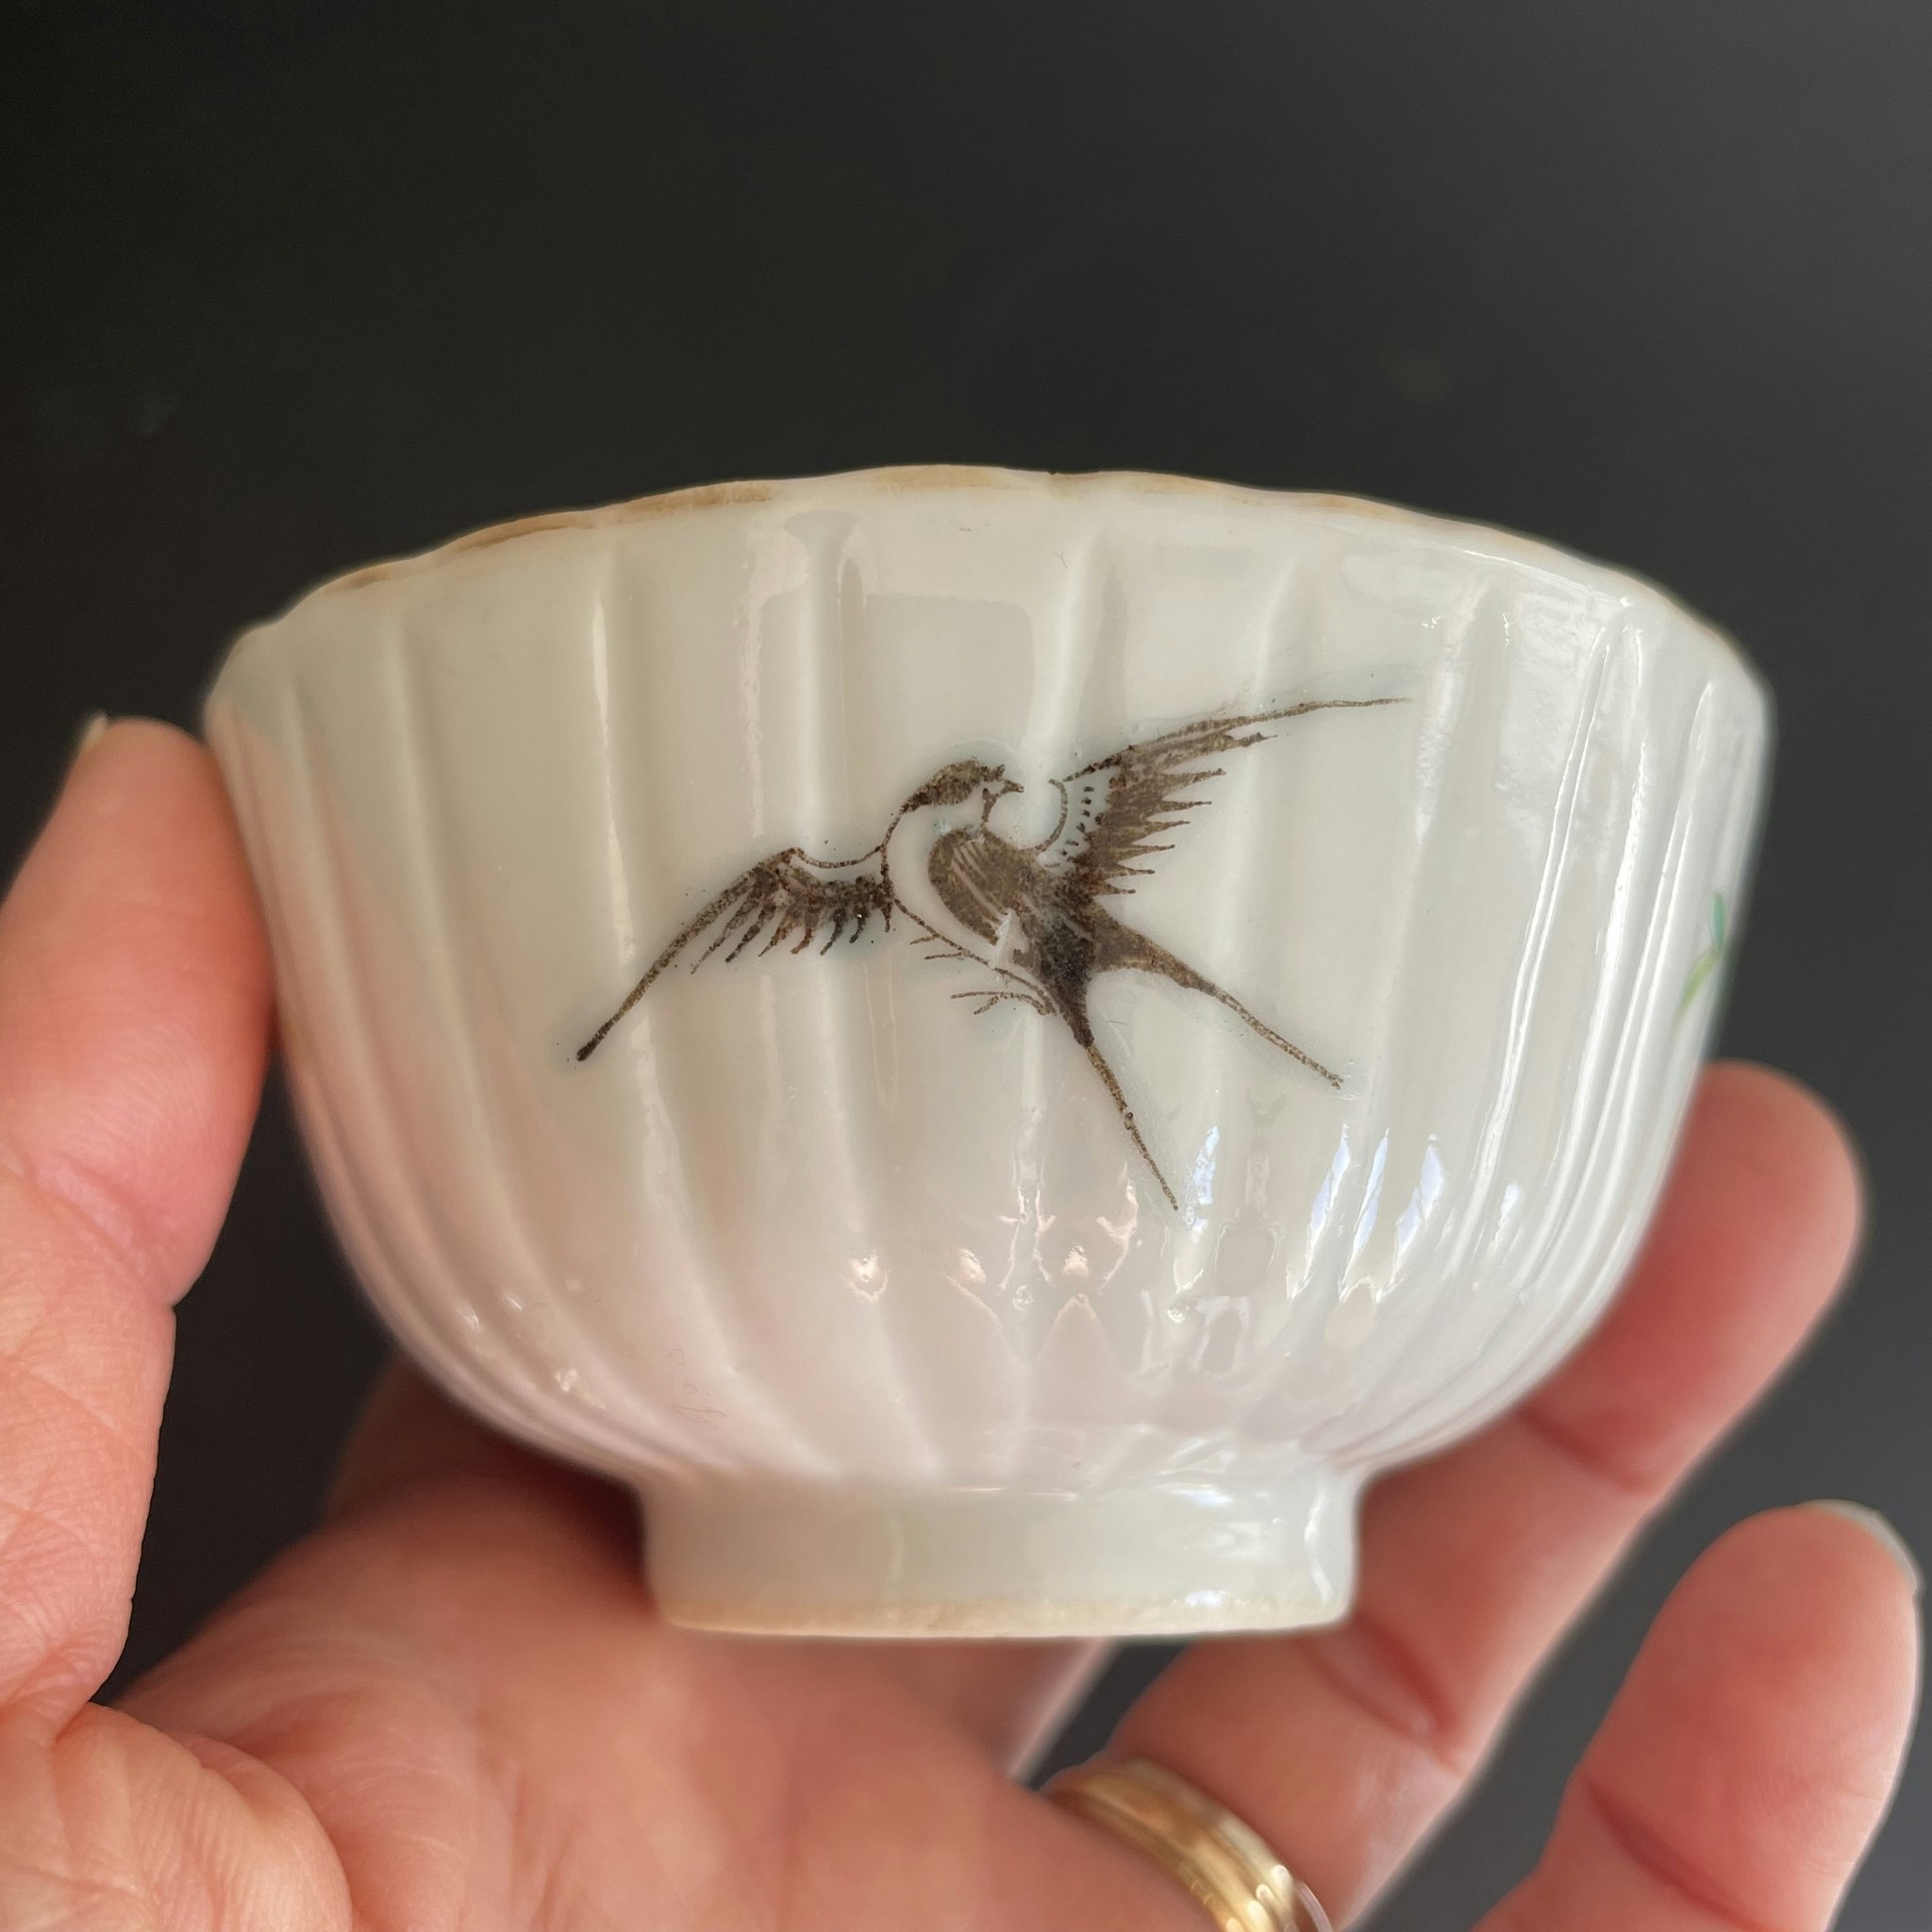 Chinese antique porcelain teacup, Late Qing Dynasty, #1870